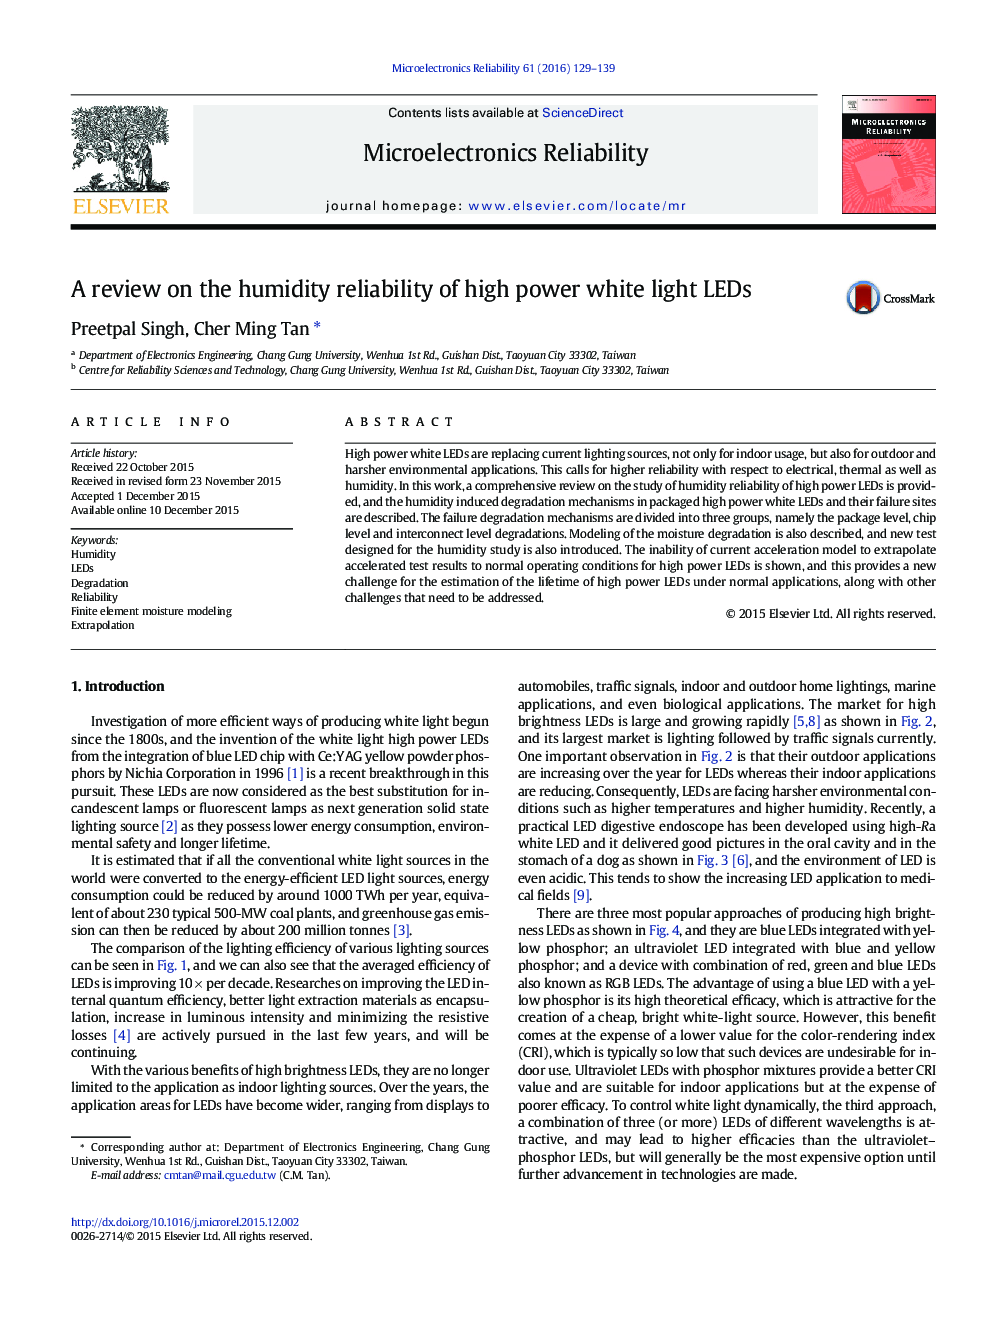 A review on the humidity reliability of high power white light LEDs